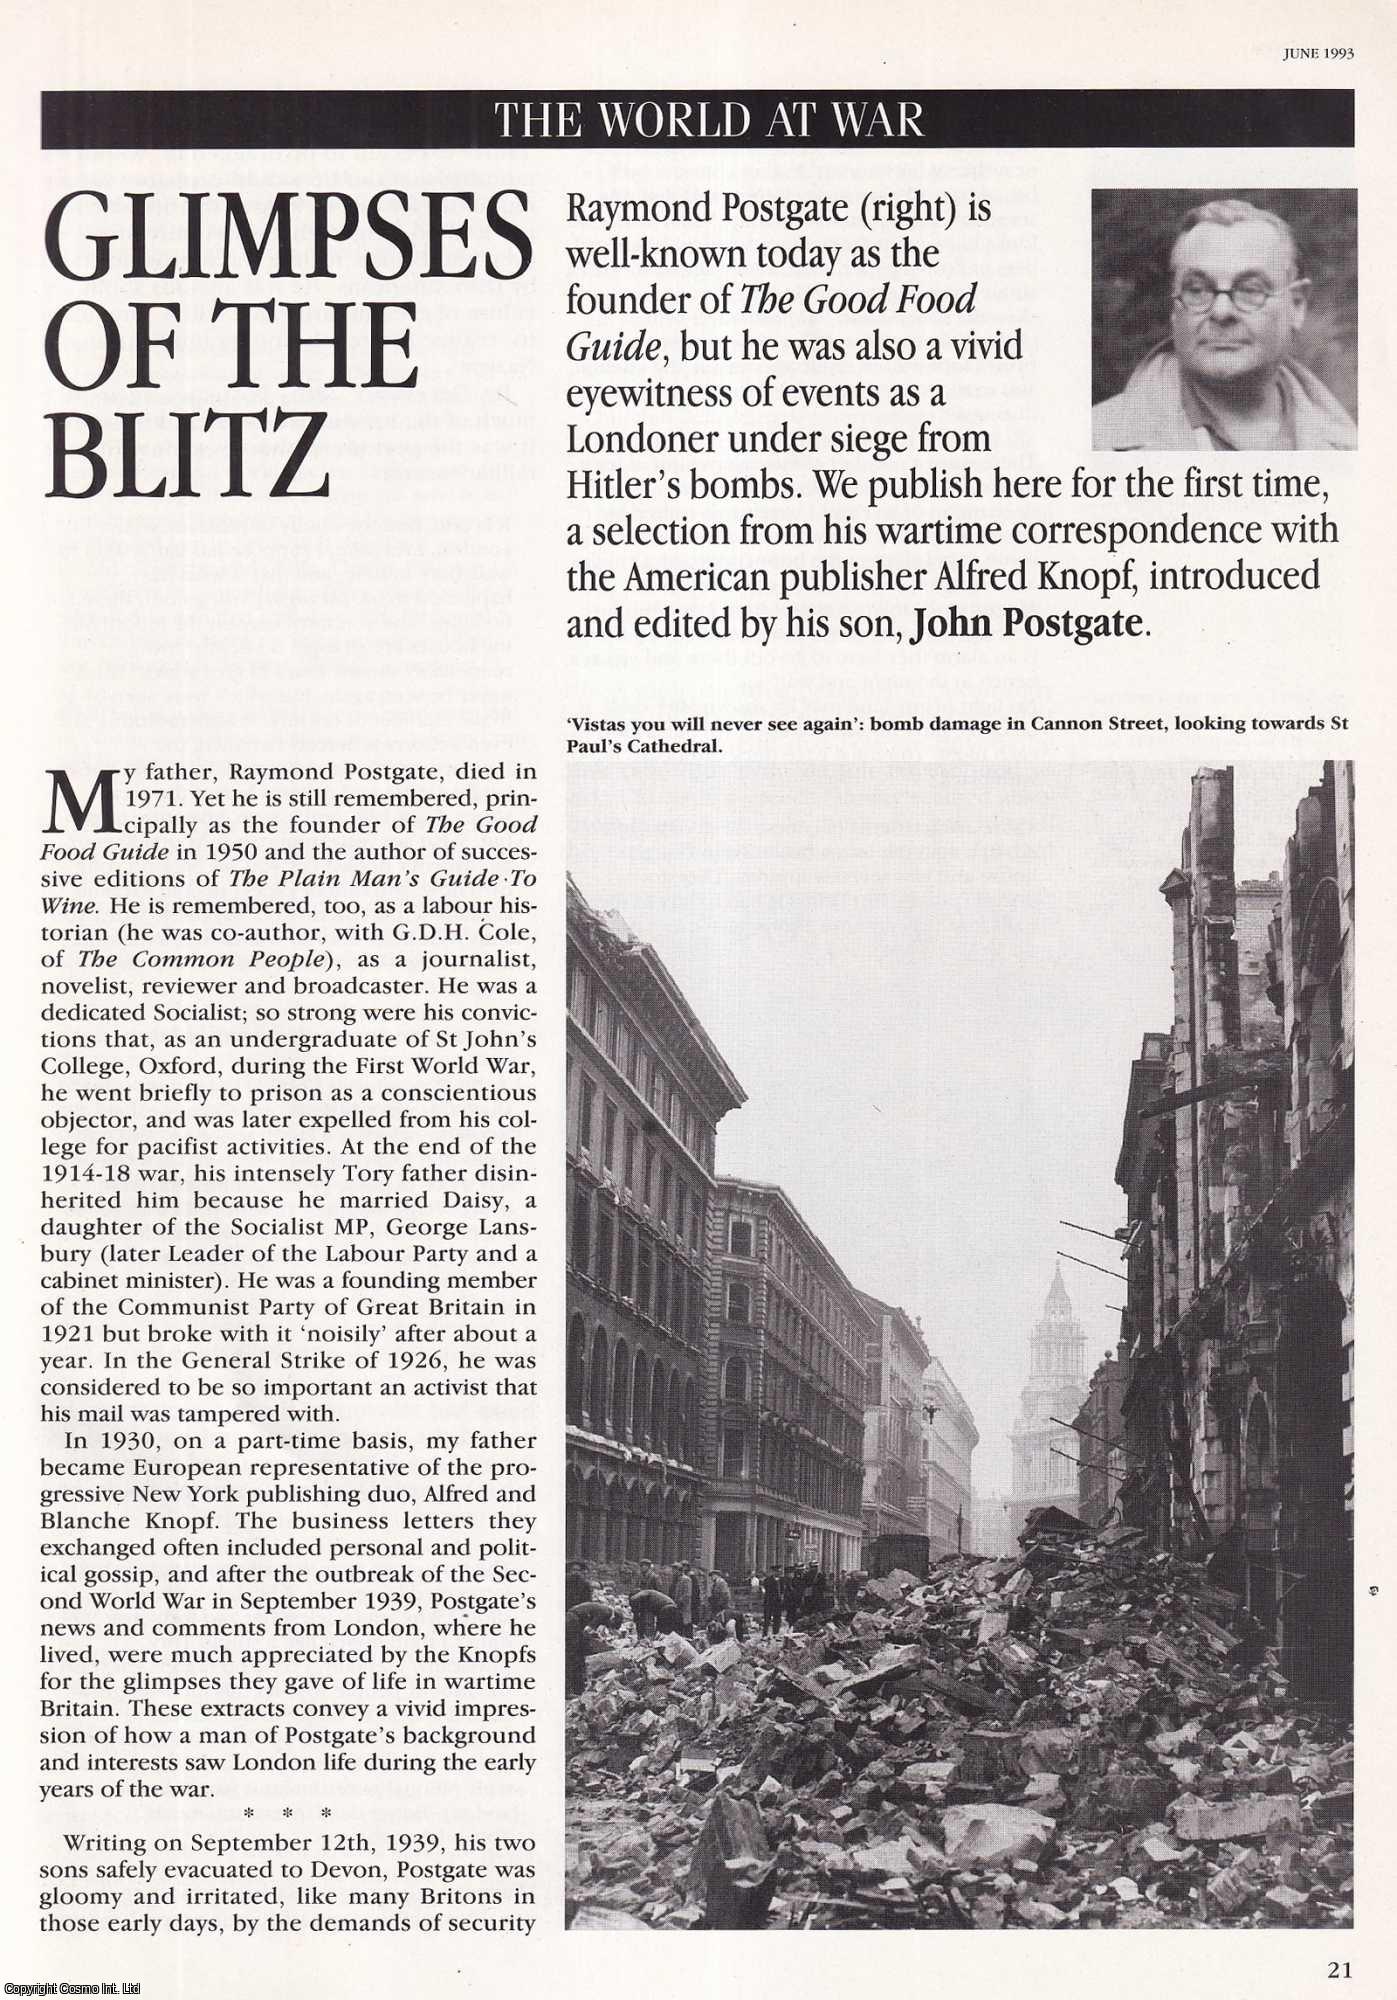 John Postgate - Glimpses of the Blitz: Wartime Correspondence between Raymond Postgate and American Publisher Alfred Knopf. An original article from History Today, 1993.